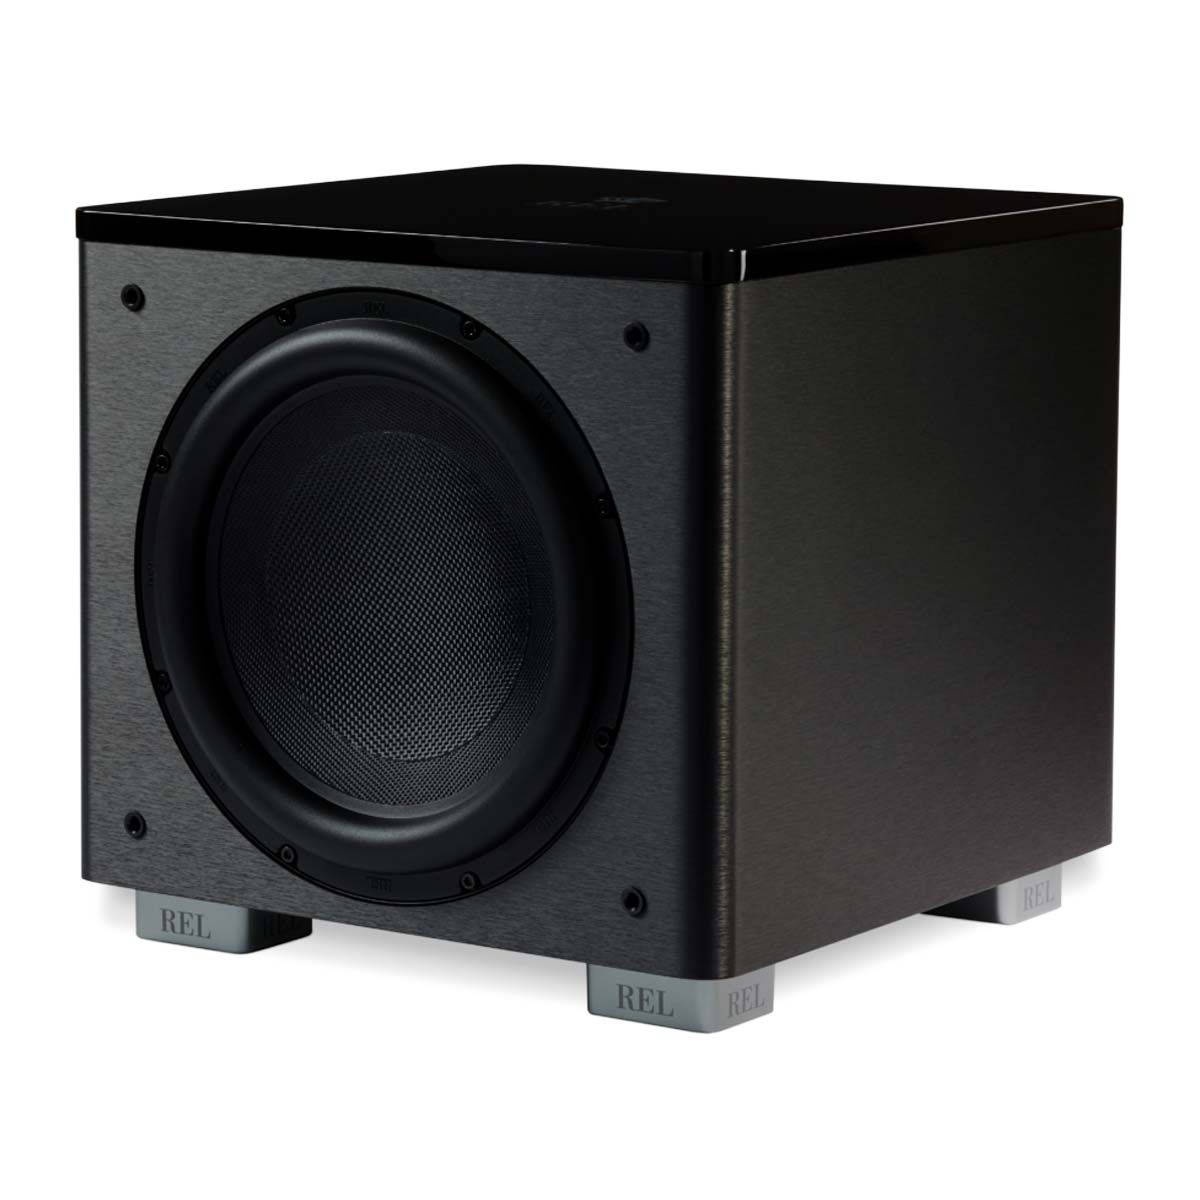 REL Acoustics HT/1205 MKII Subwoofer - angled front view without grille